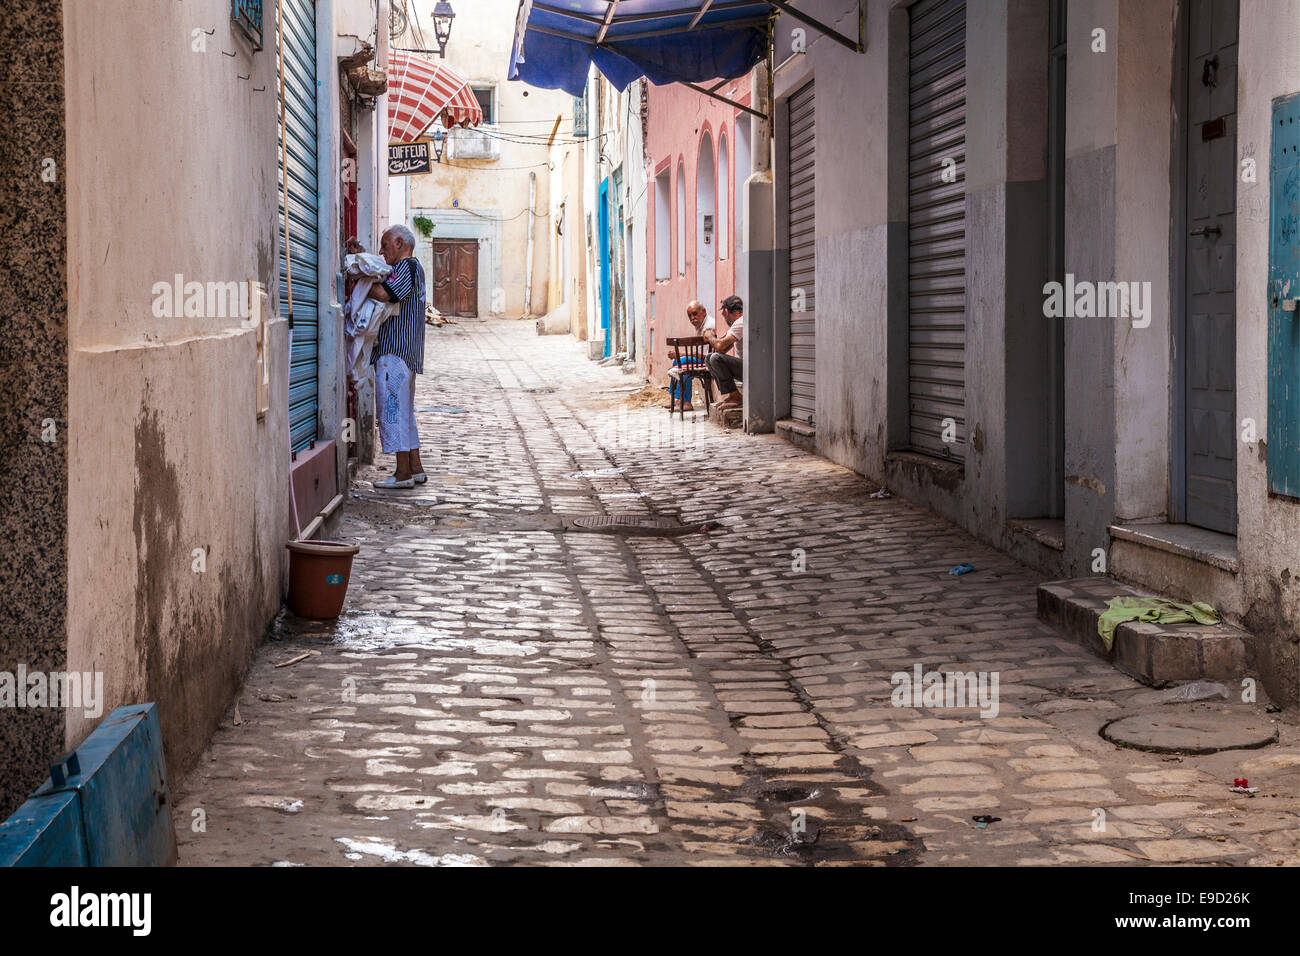 A man collects laundry from a house down a sidestreet in the medina at Sousse, Tunisia while two others chat on a doorstep. Stock Photo